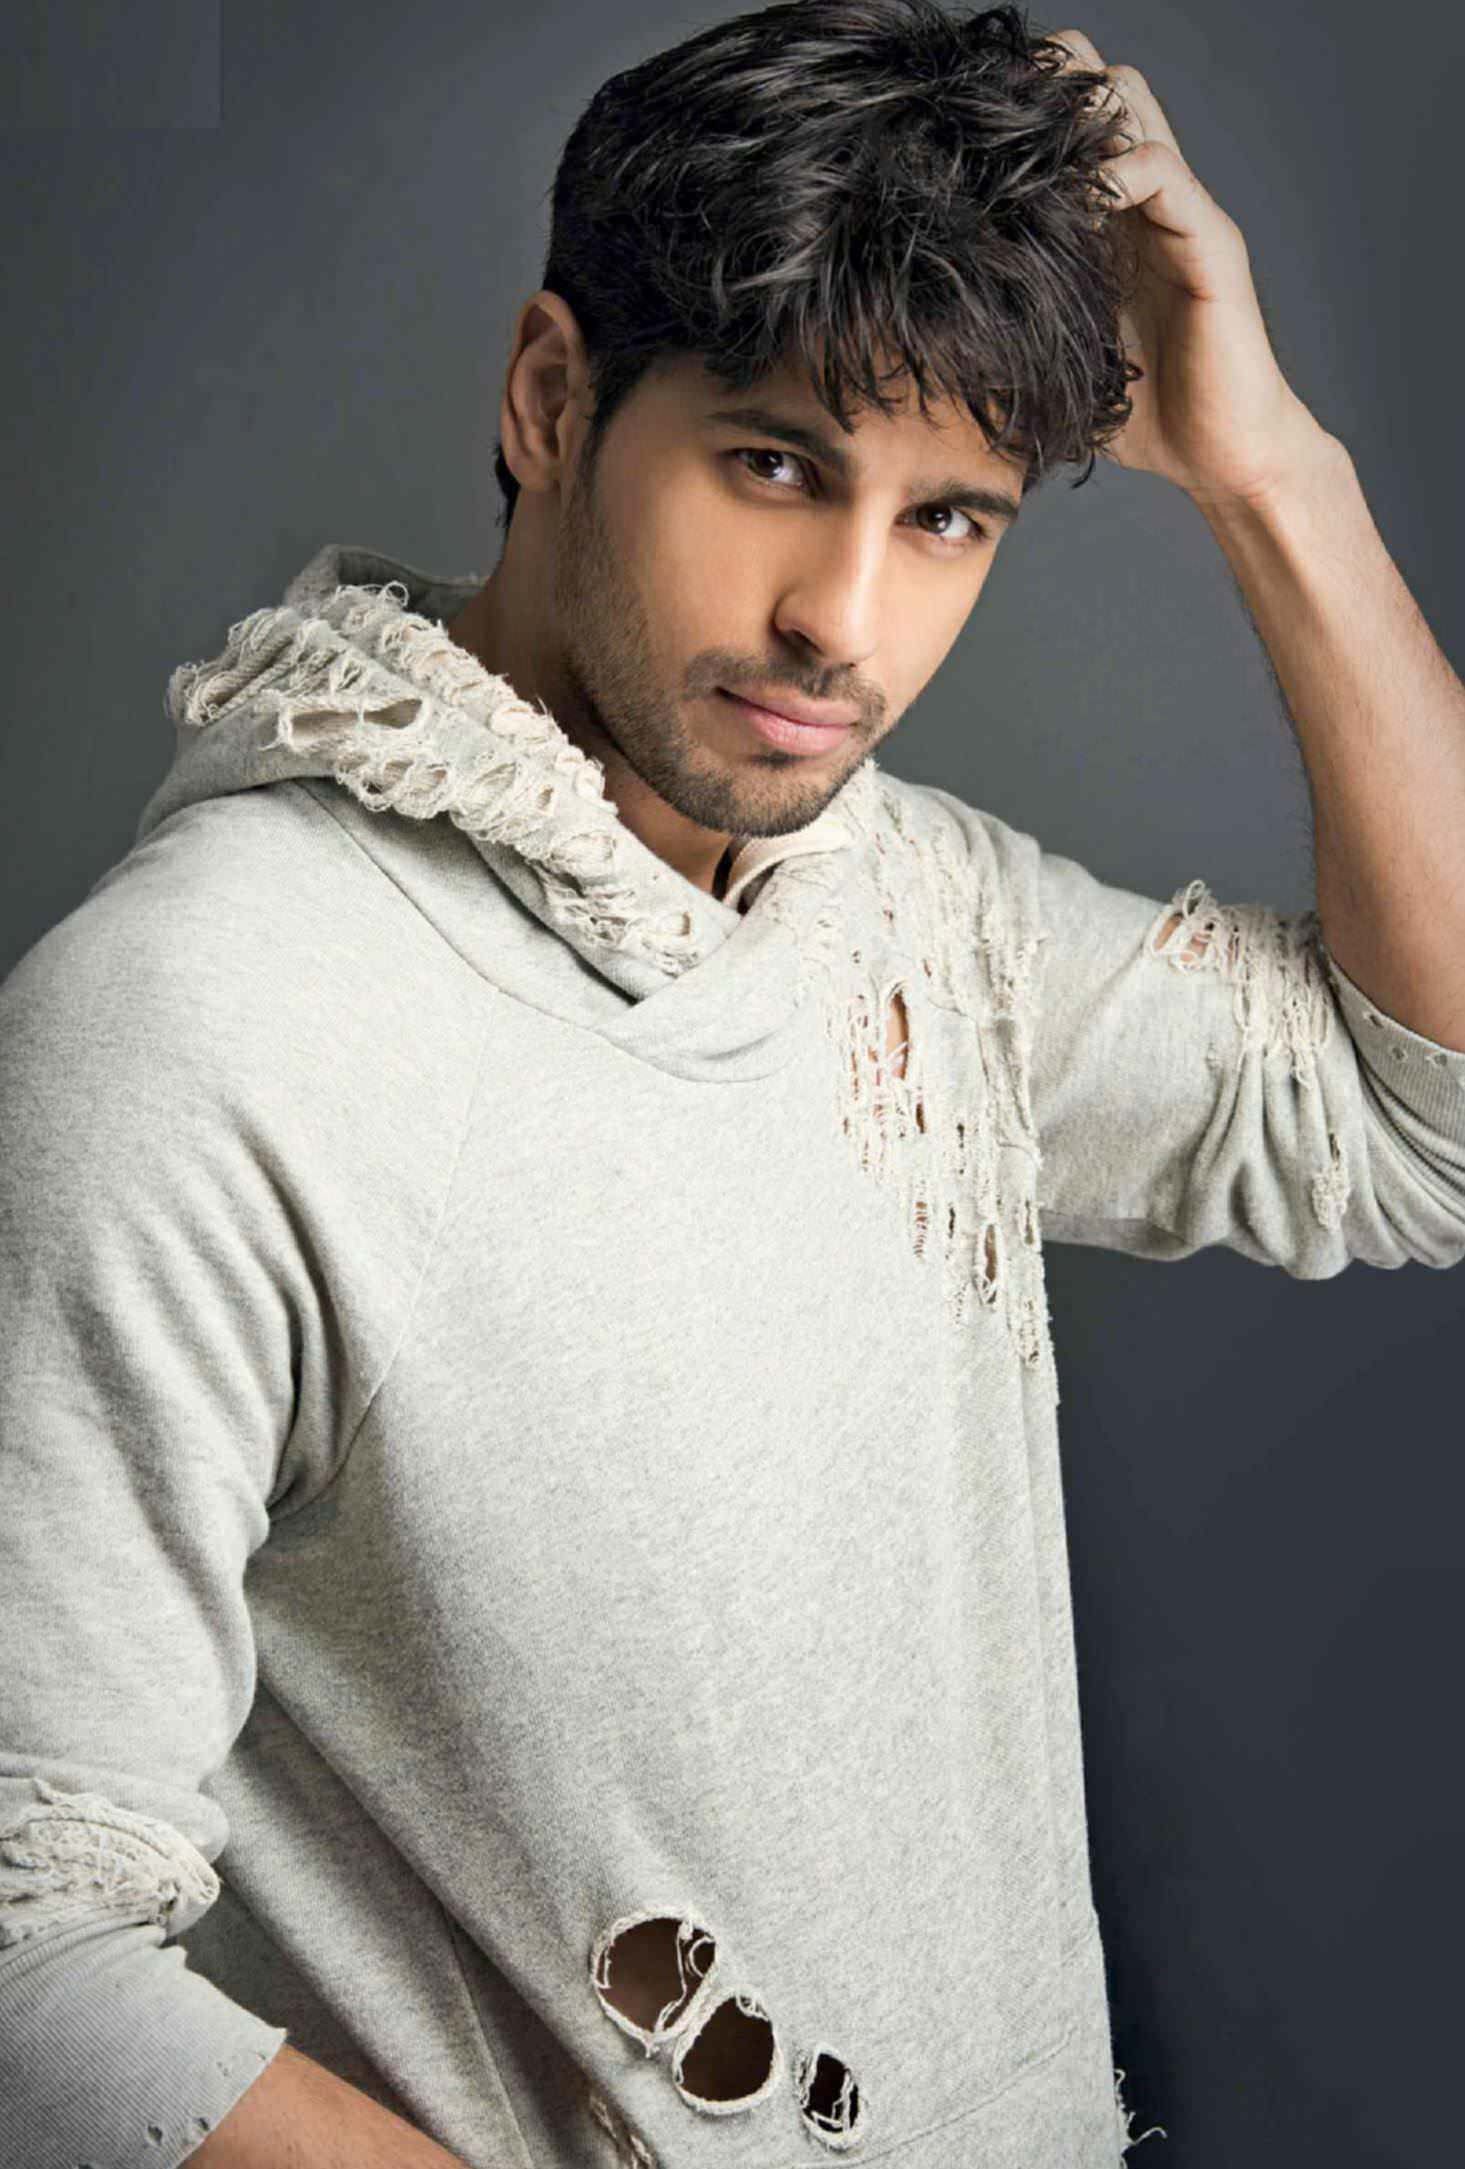 Sidharth Malhotra Begins Shooting The Second Schedule Of Shershaah